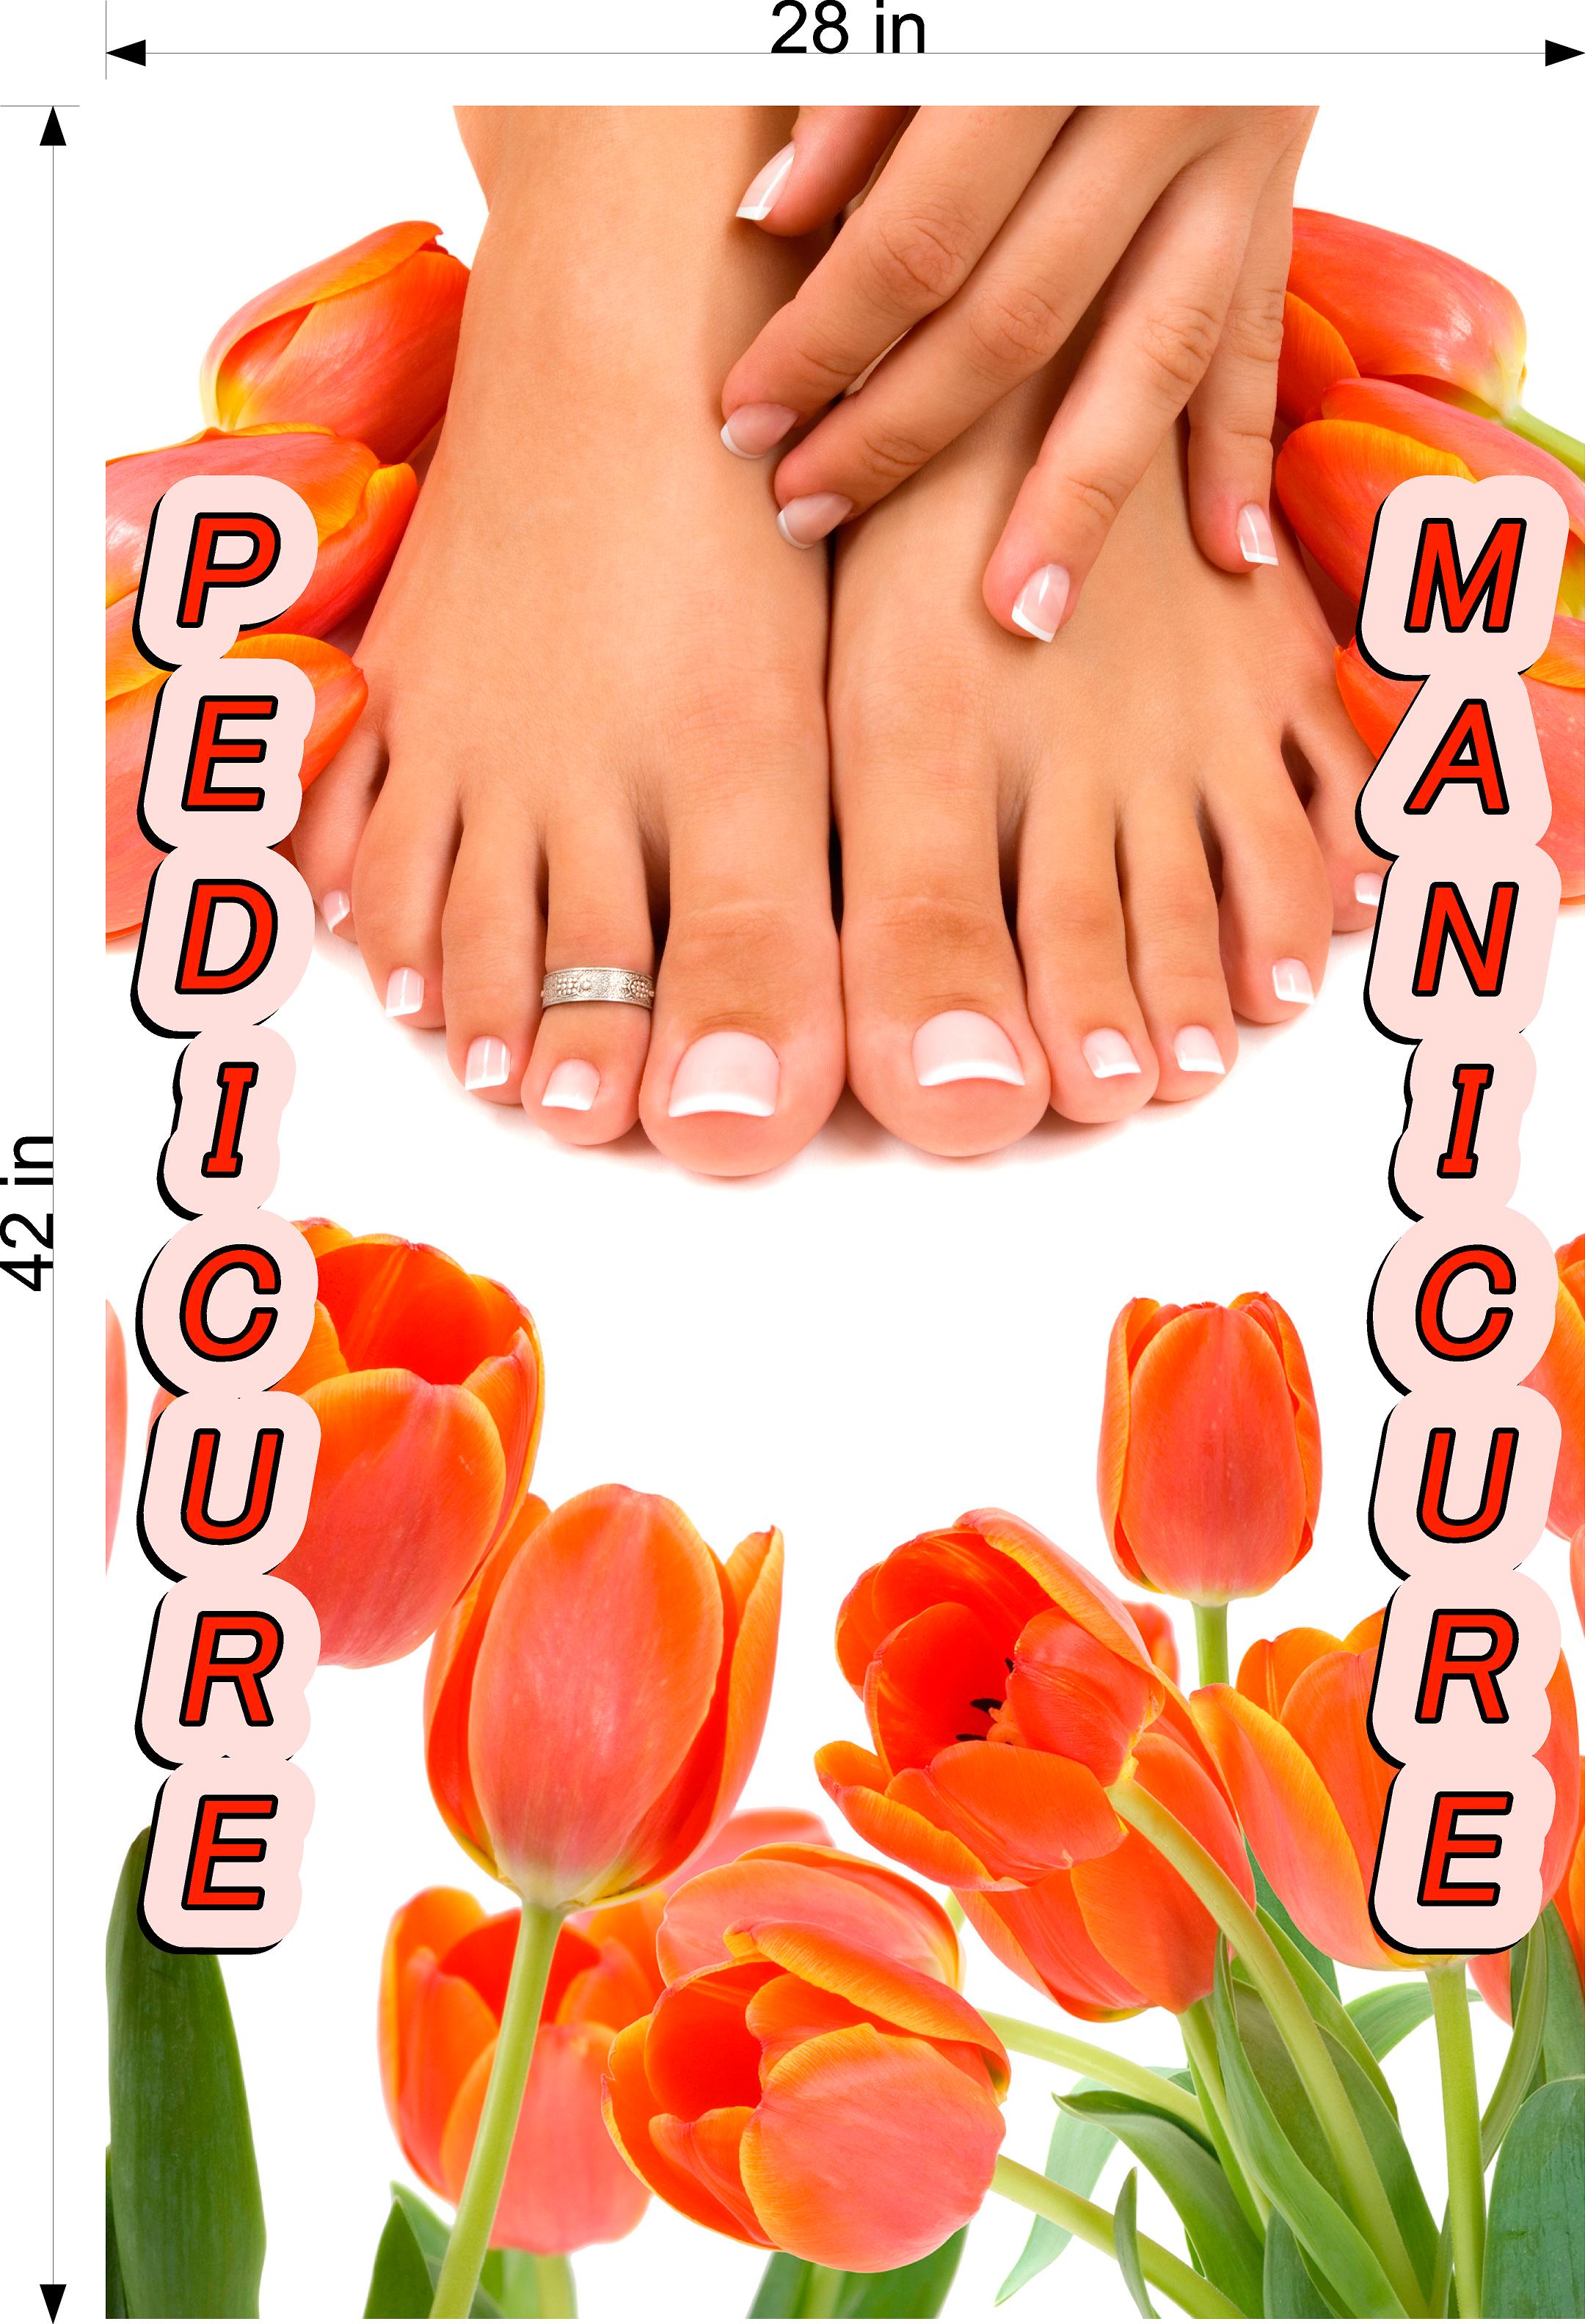 Pedicure & Manicure 16 Wallpaper Poster Decal with Adhesive Backing Wall Sticker Decor Indoors Interior Sign Vertical